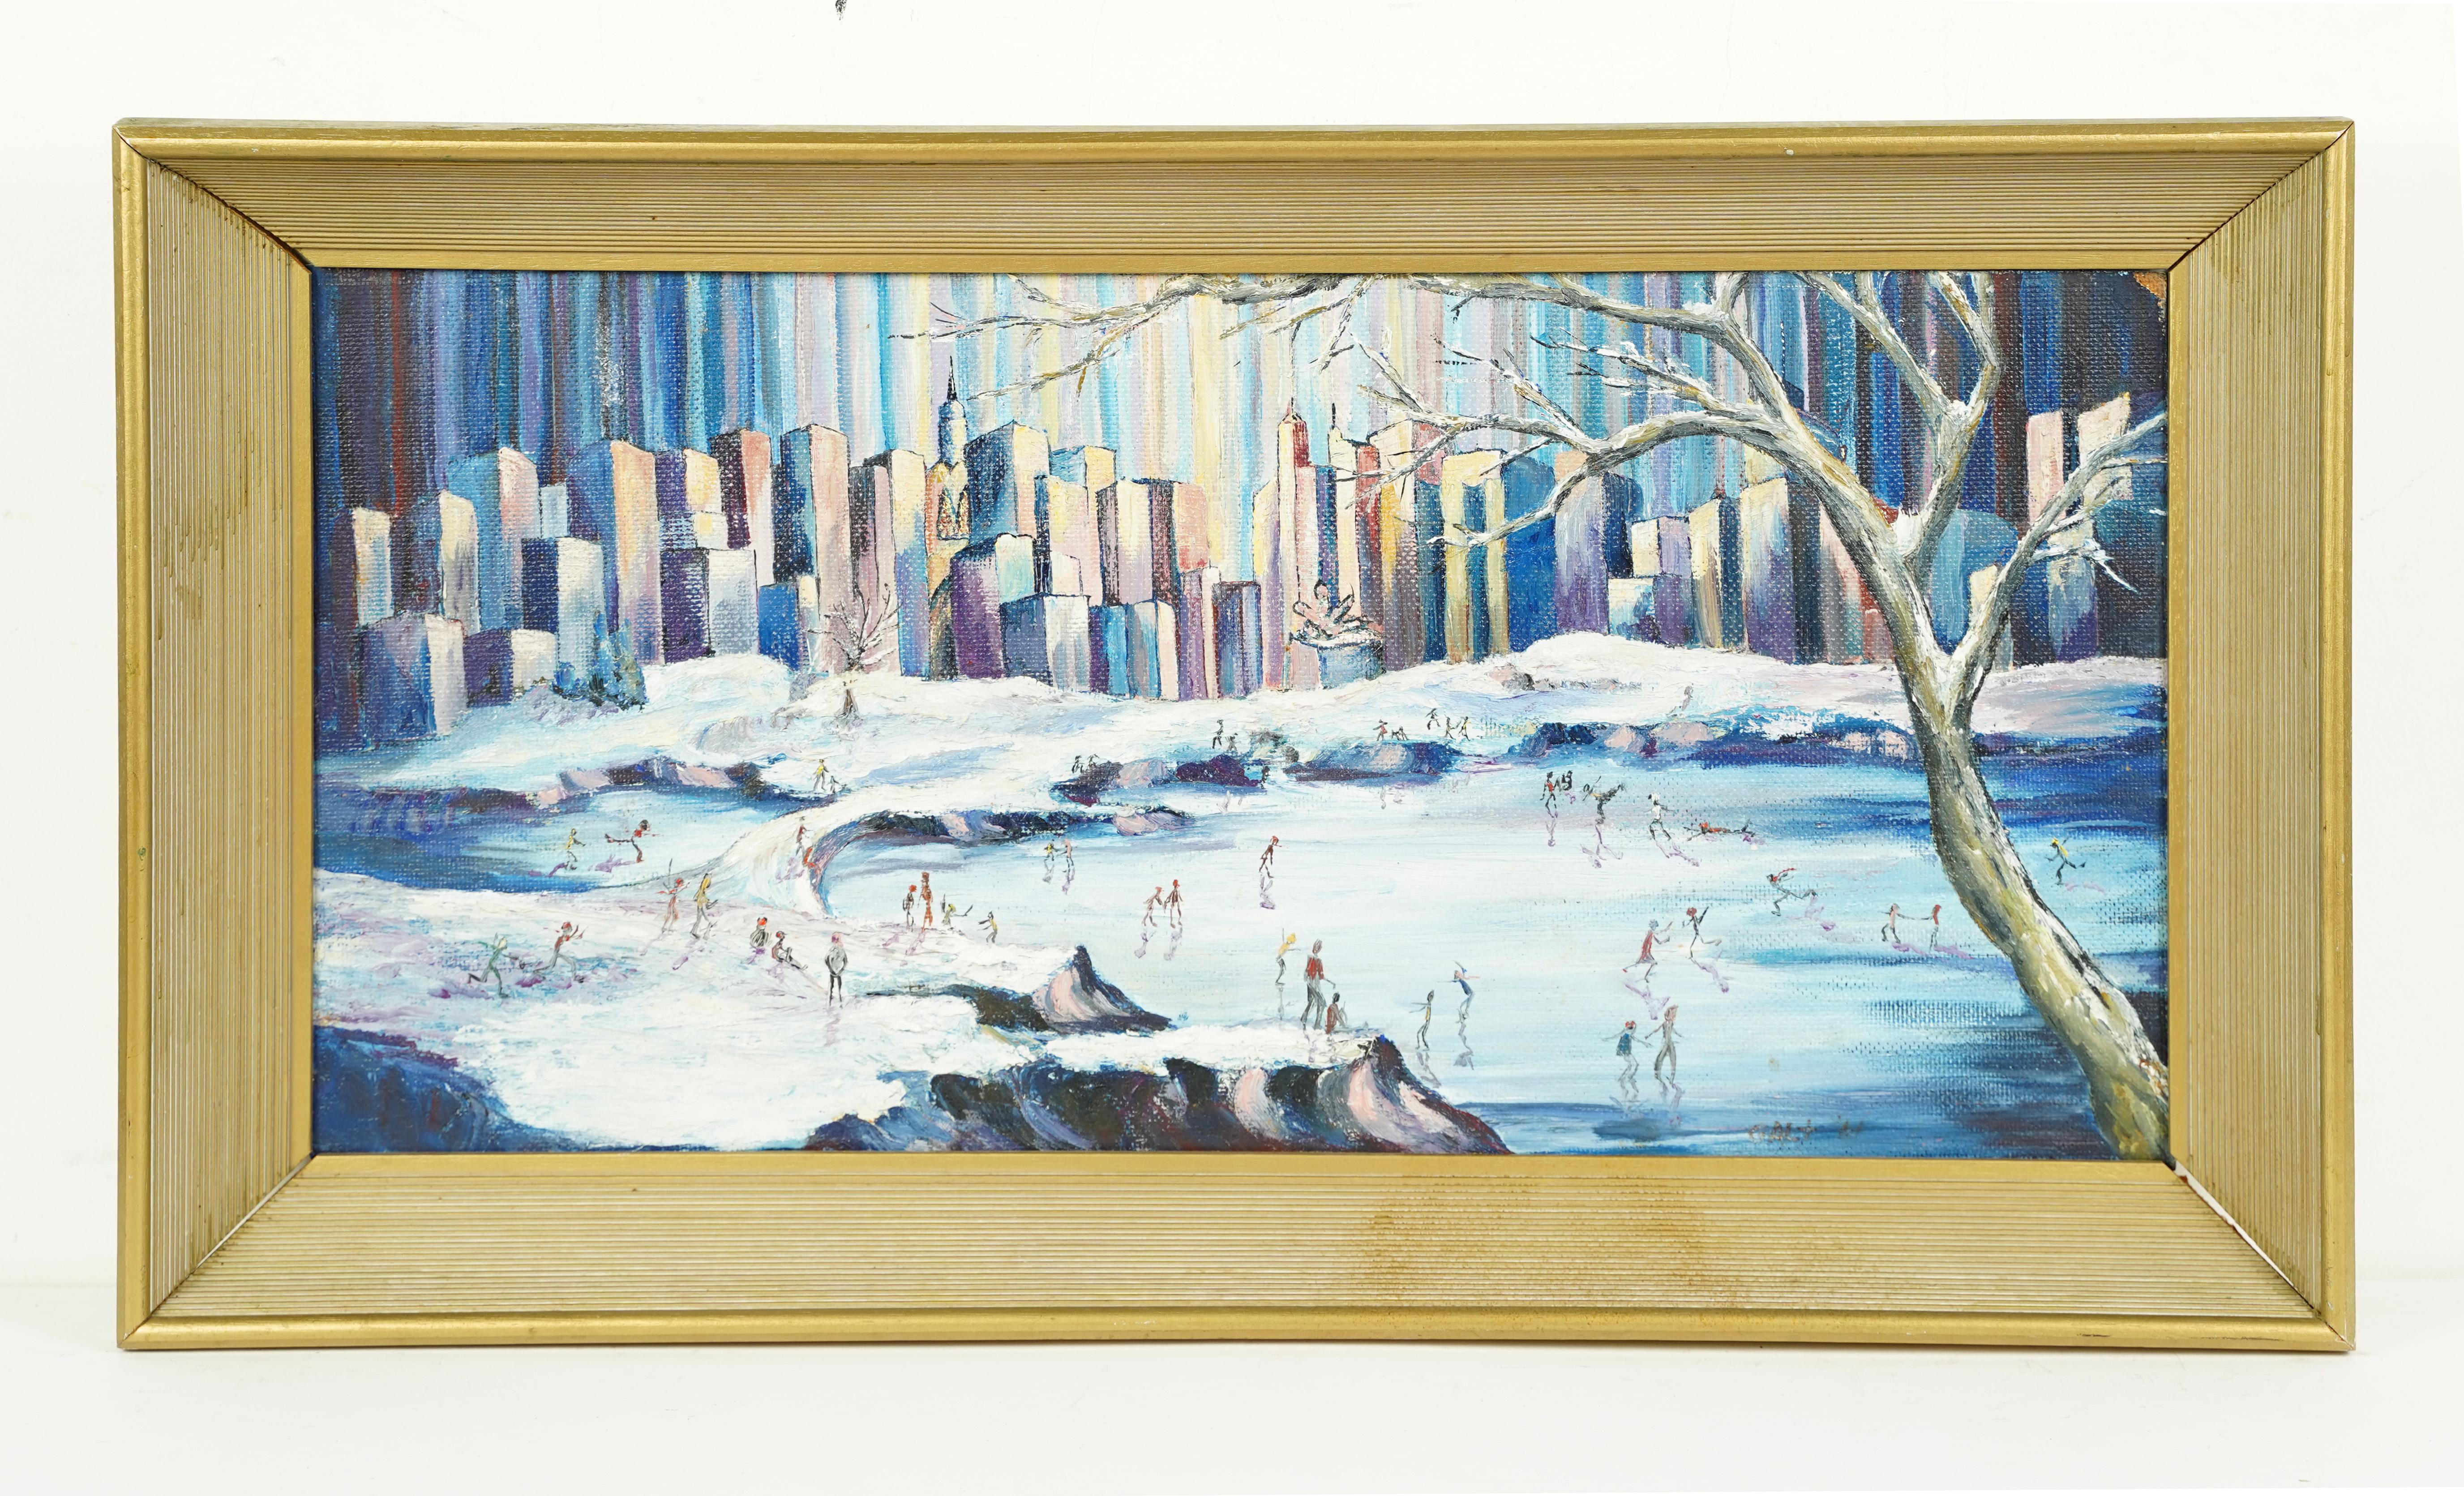  Antique American New York City Large Modernist Skating in Central Park Painting 1